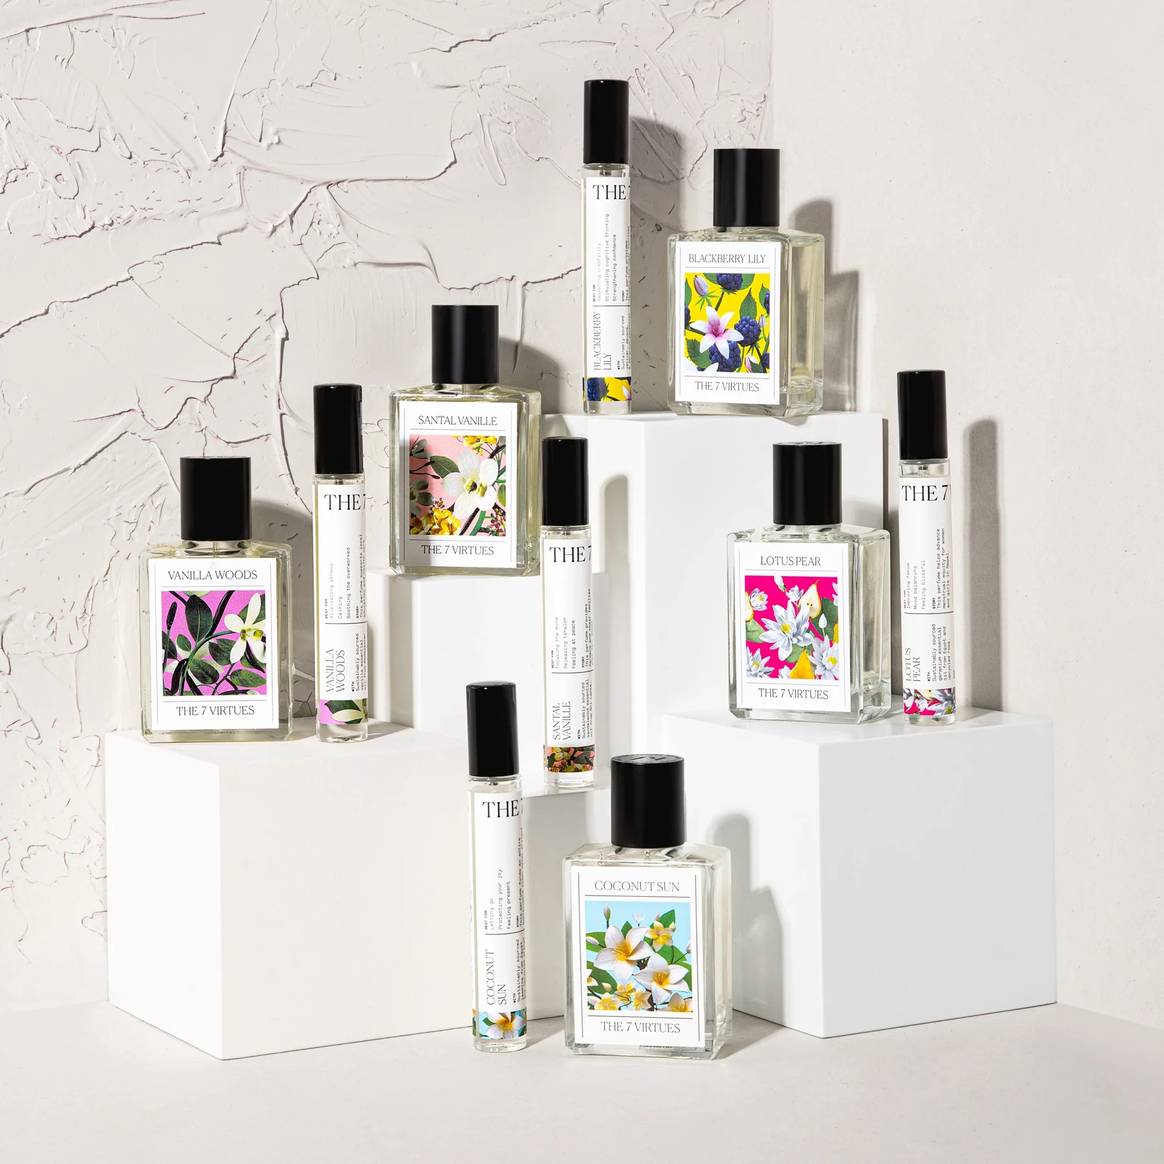 The 7 Virtues fragrance products